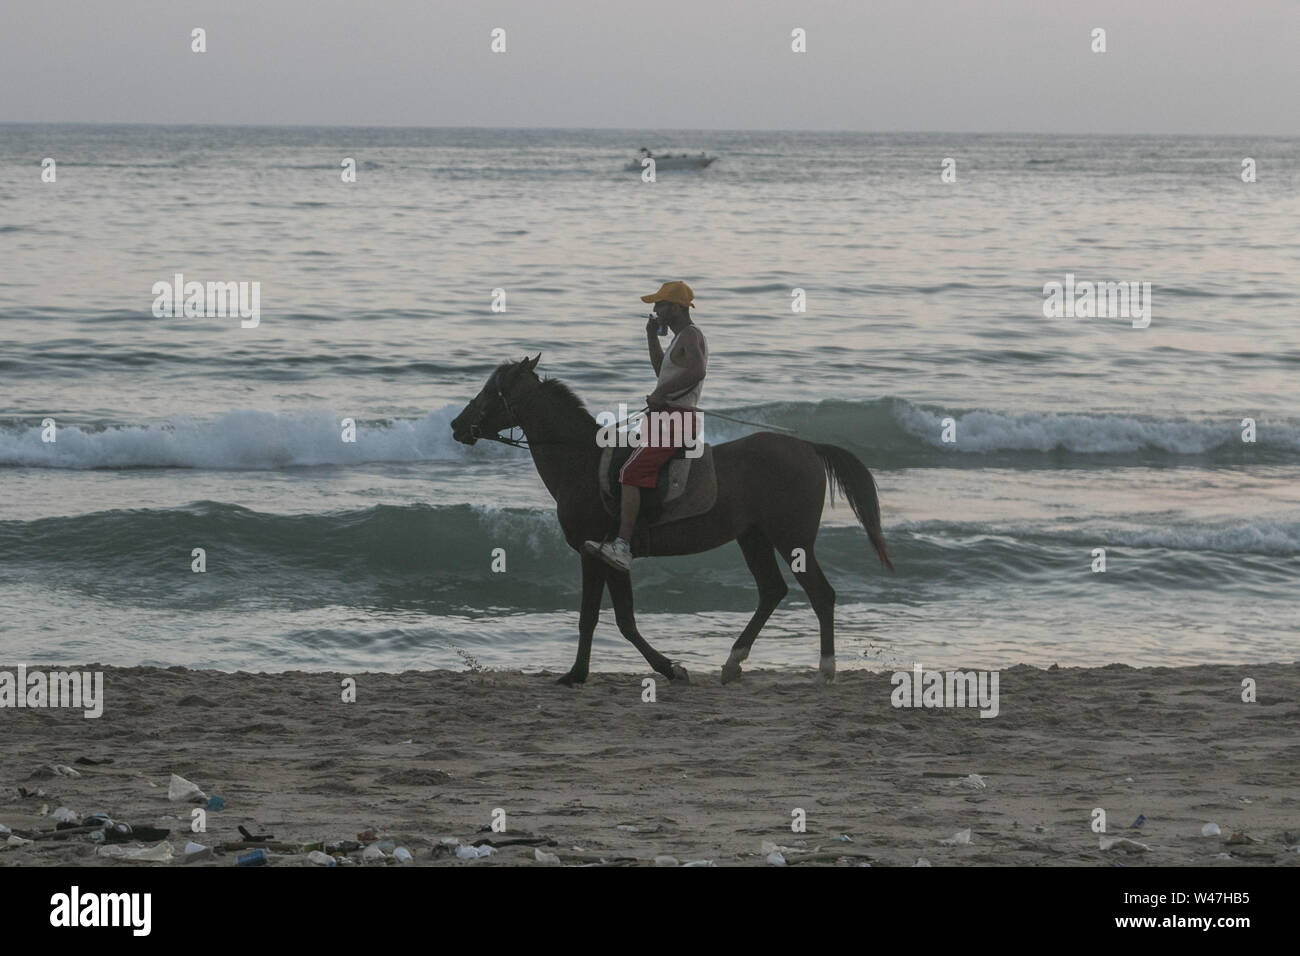 Beirut, Lebanon. 20th July, 2019. A man rides a horse at the beach as the sun sets in Beirut. Credit: Amer Ghazzal/SOPA Images/ZUMA Wire/Alamy Live News Stock Photo